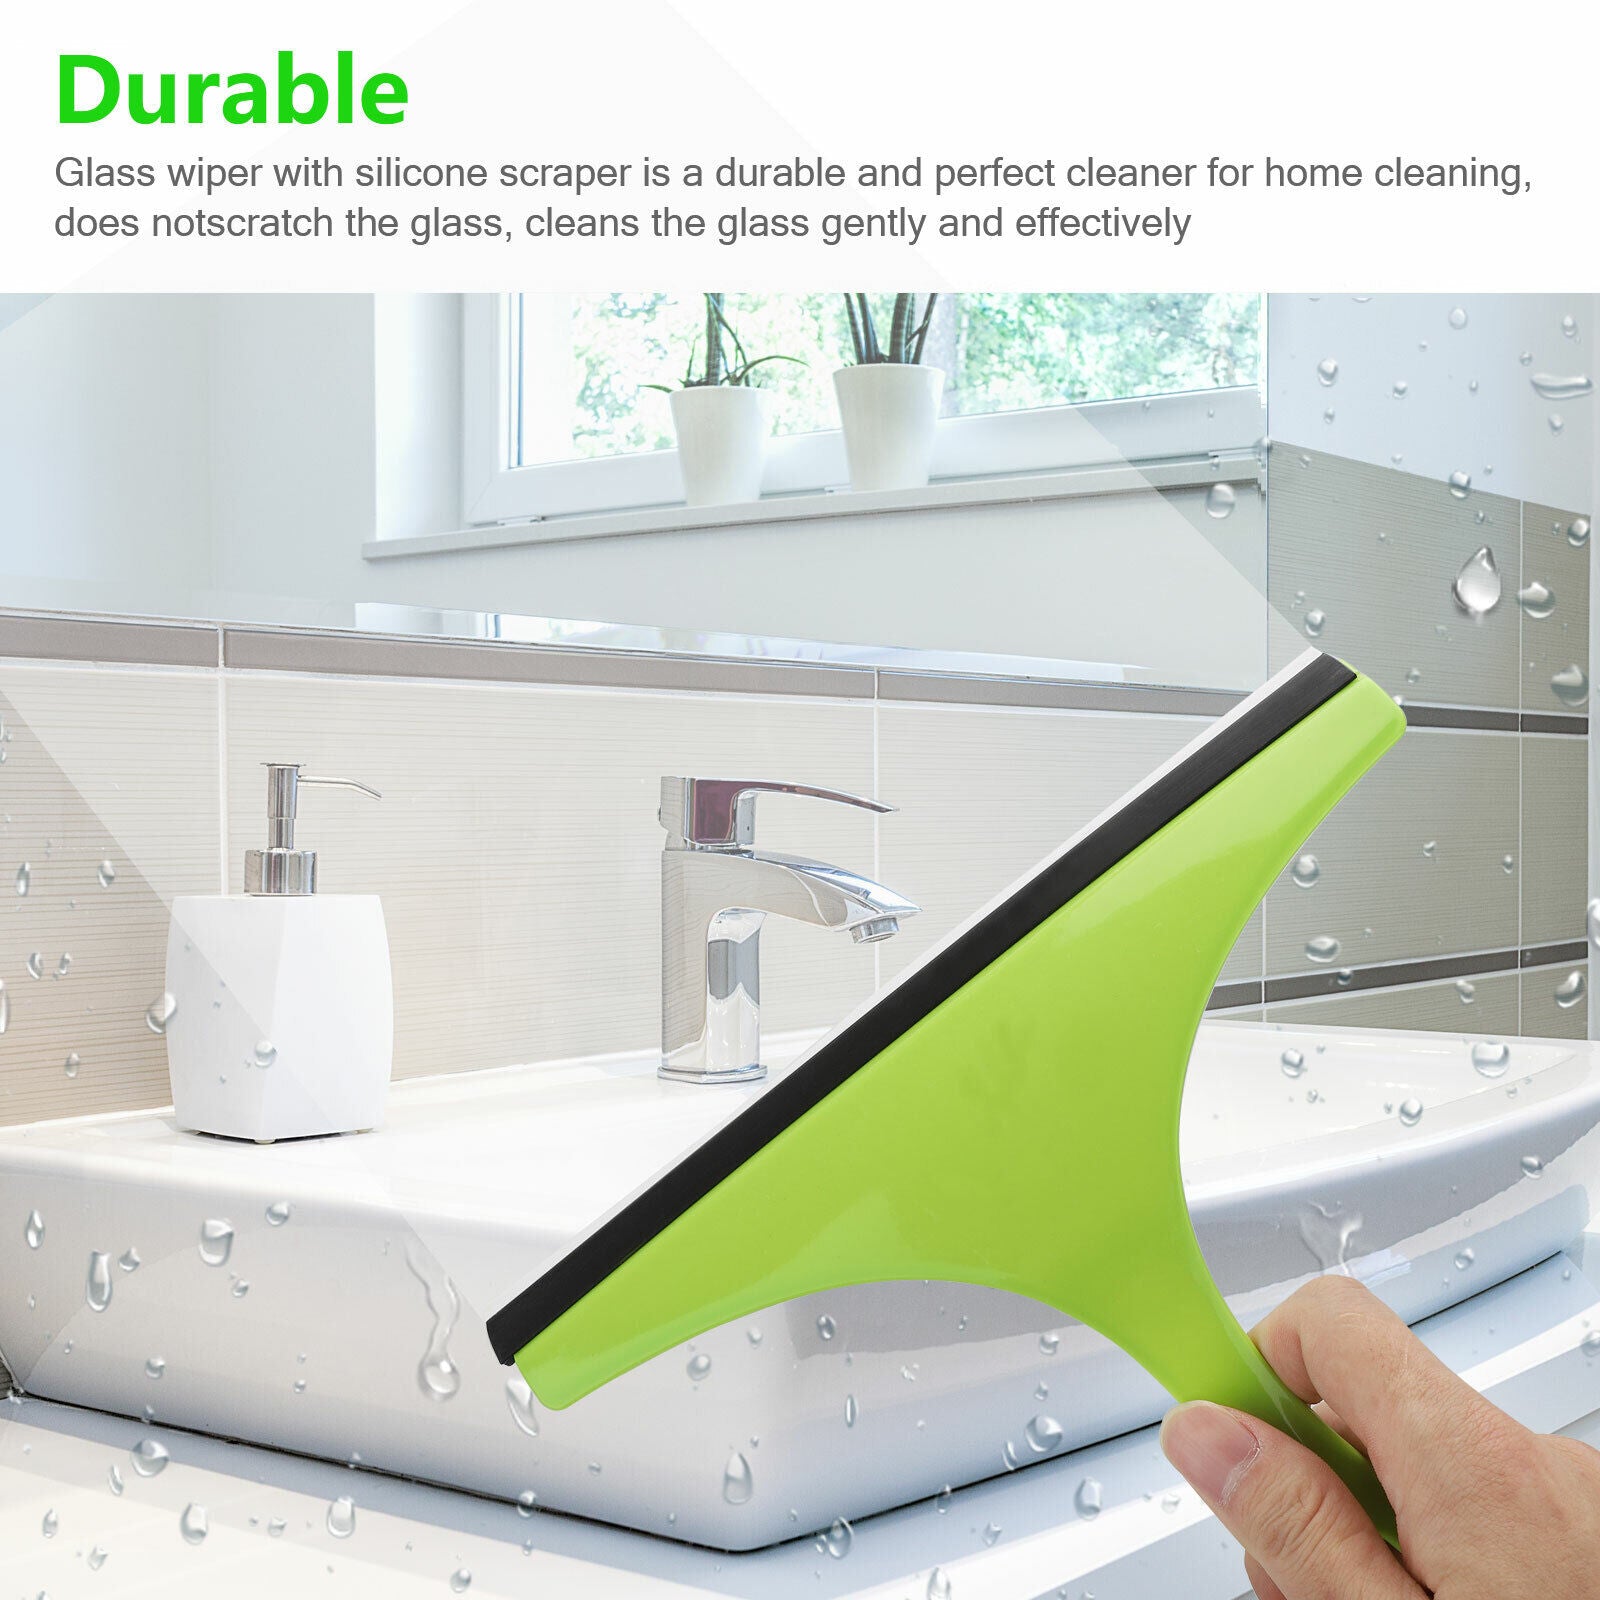 3X Glass Window Wiper Cleaner Squeegee Shower Screen Mirror Home Car Blade Brush Simple Green Car Glass Window Cleaner Wiper Cleaner Household Cleaning Brush Window Cleaning Tools